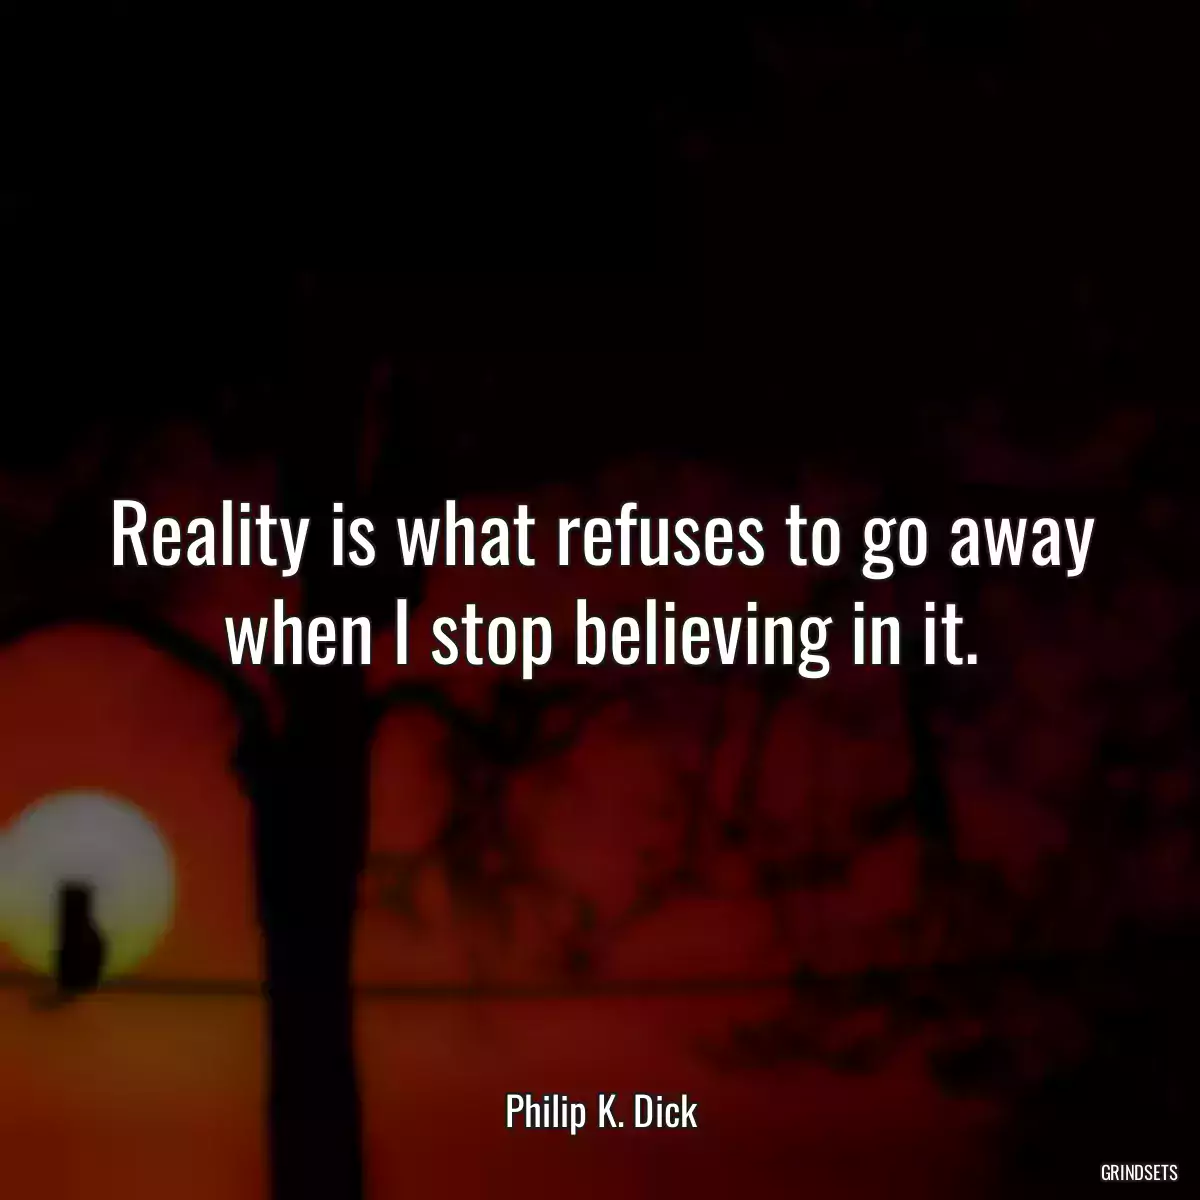 Reality is what refuses to go away when I stop believing in it.